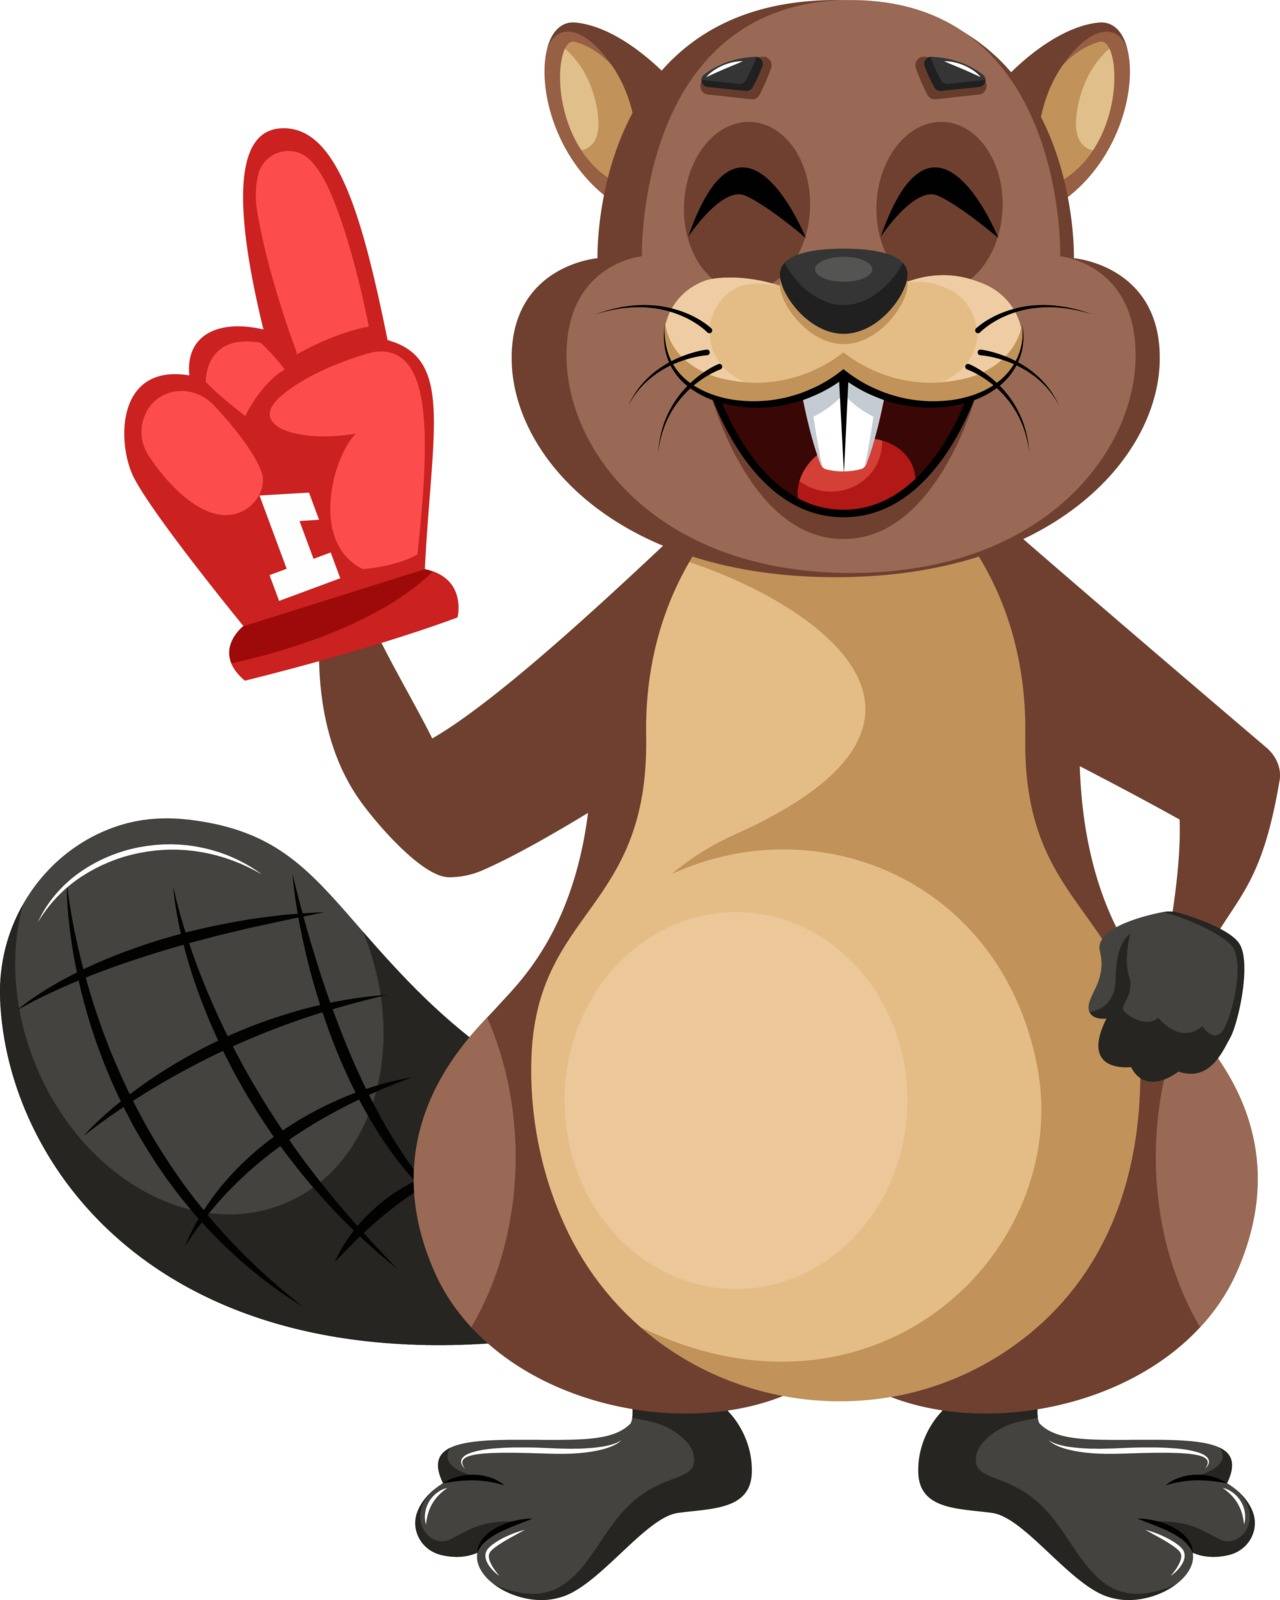 Beaver with big glove, illustration, vector on white background.